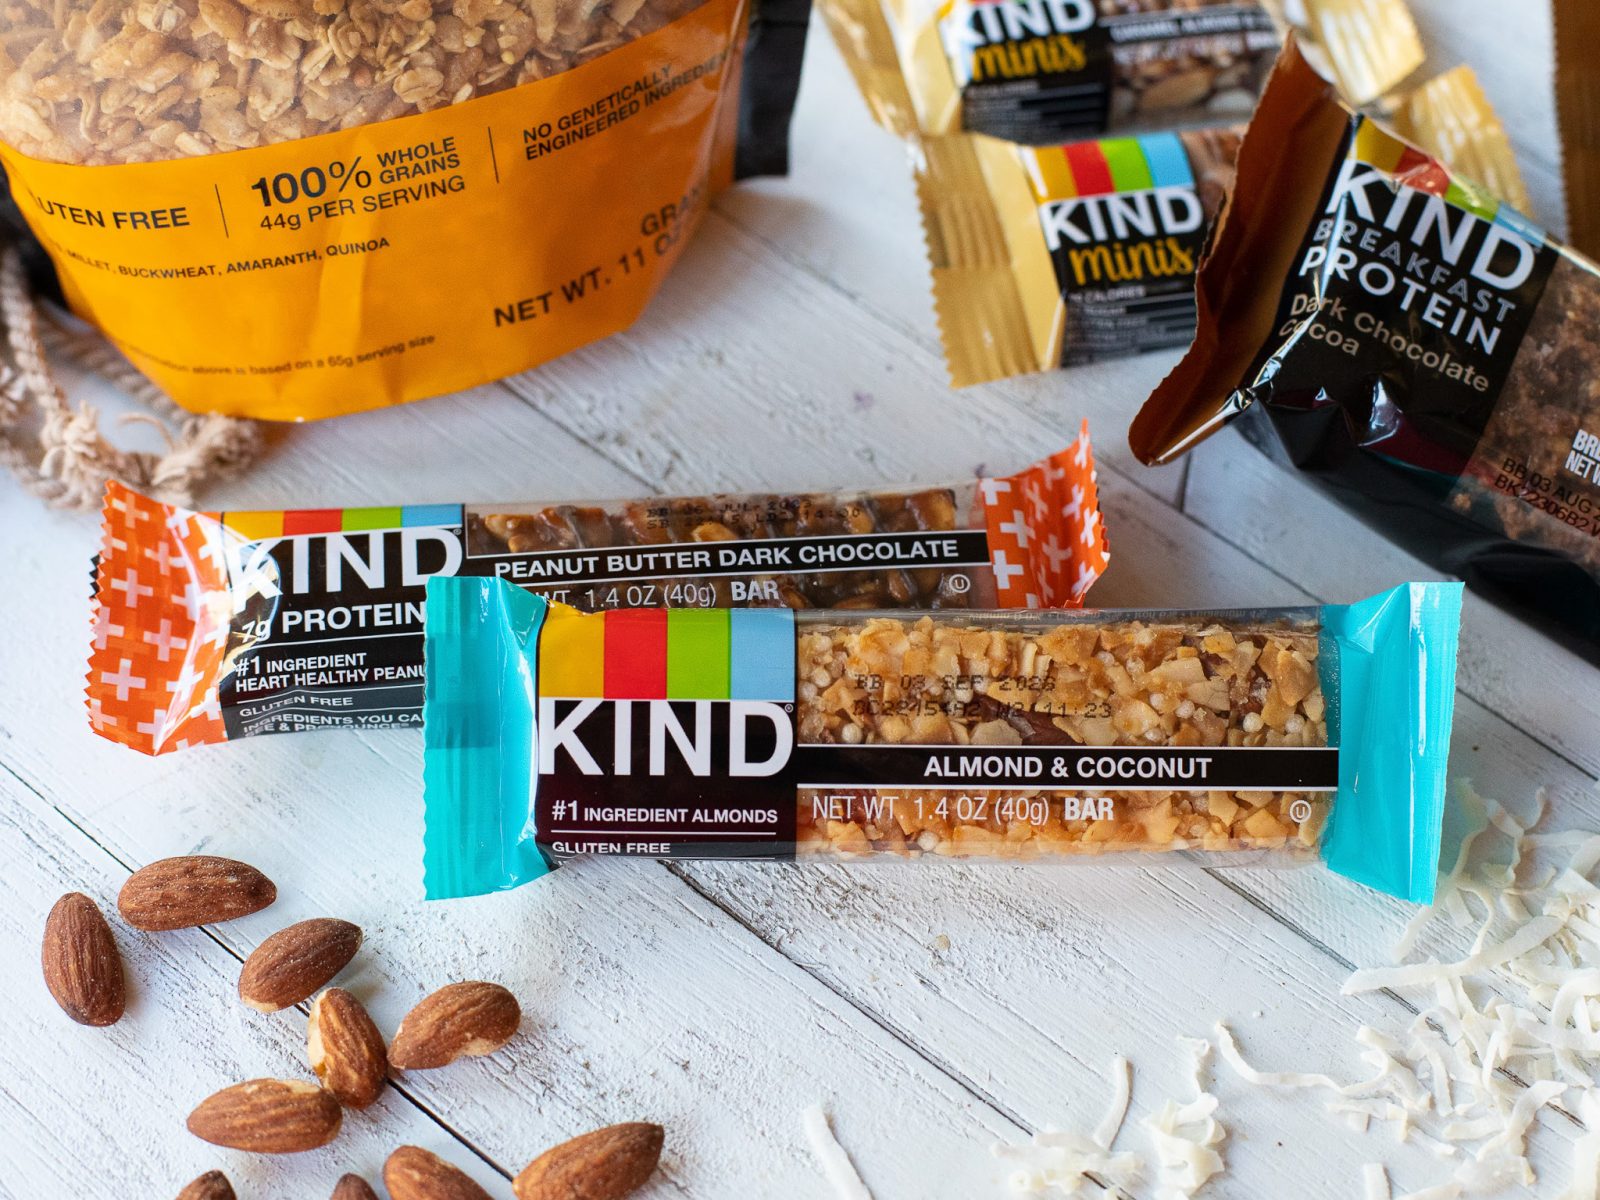 Kind Bars 6-Pack Boxes As Low As $5.99 At Kroger